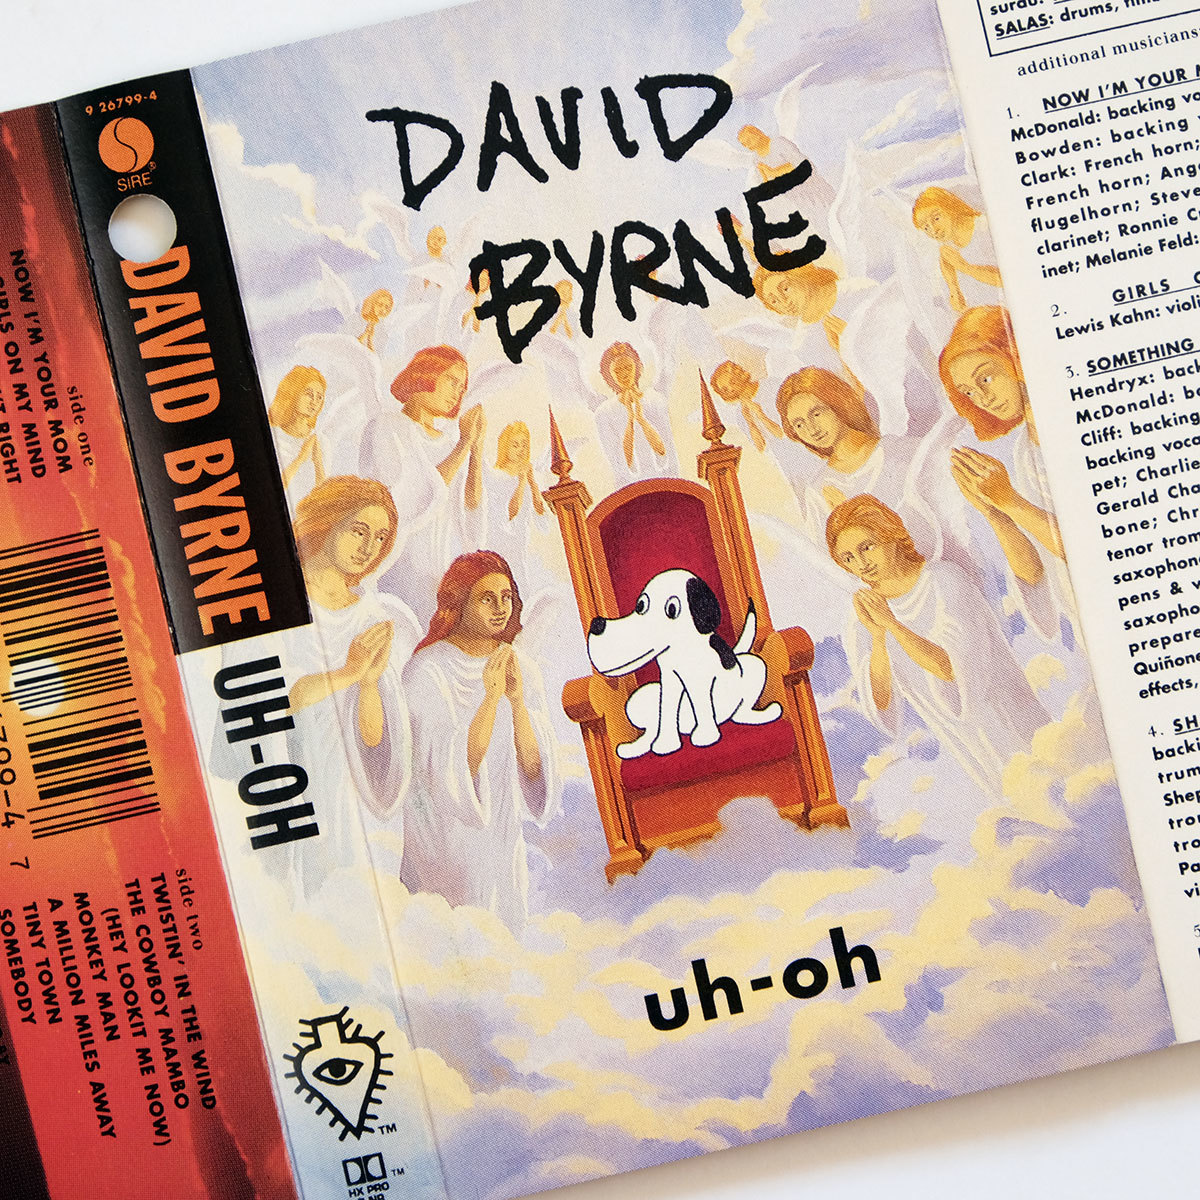 { height sound quality digalog specification / dolby HX PRO/US version cassette tape }David Byrne*Uh-Oh* David bar n/Talking Heads/to- King hez